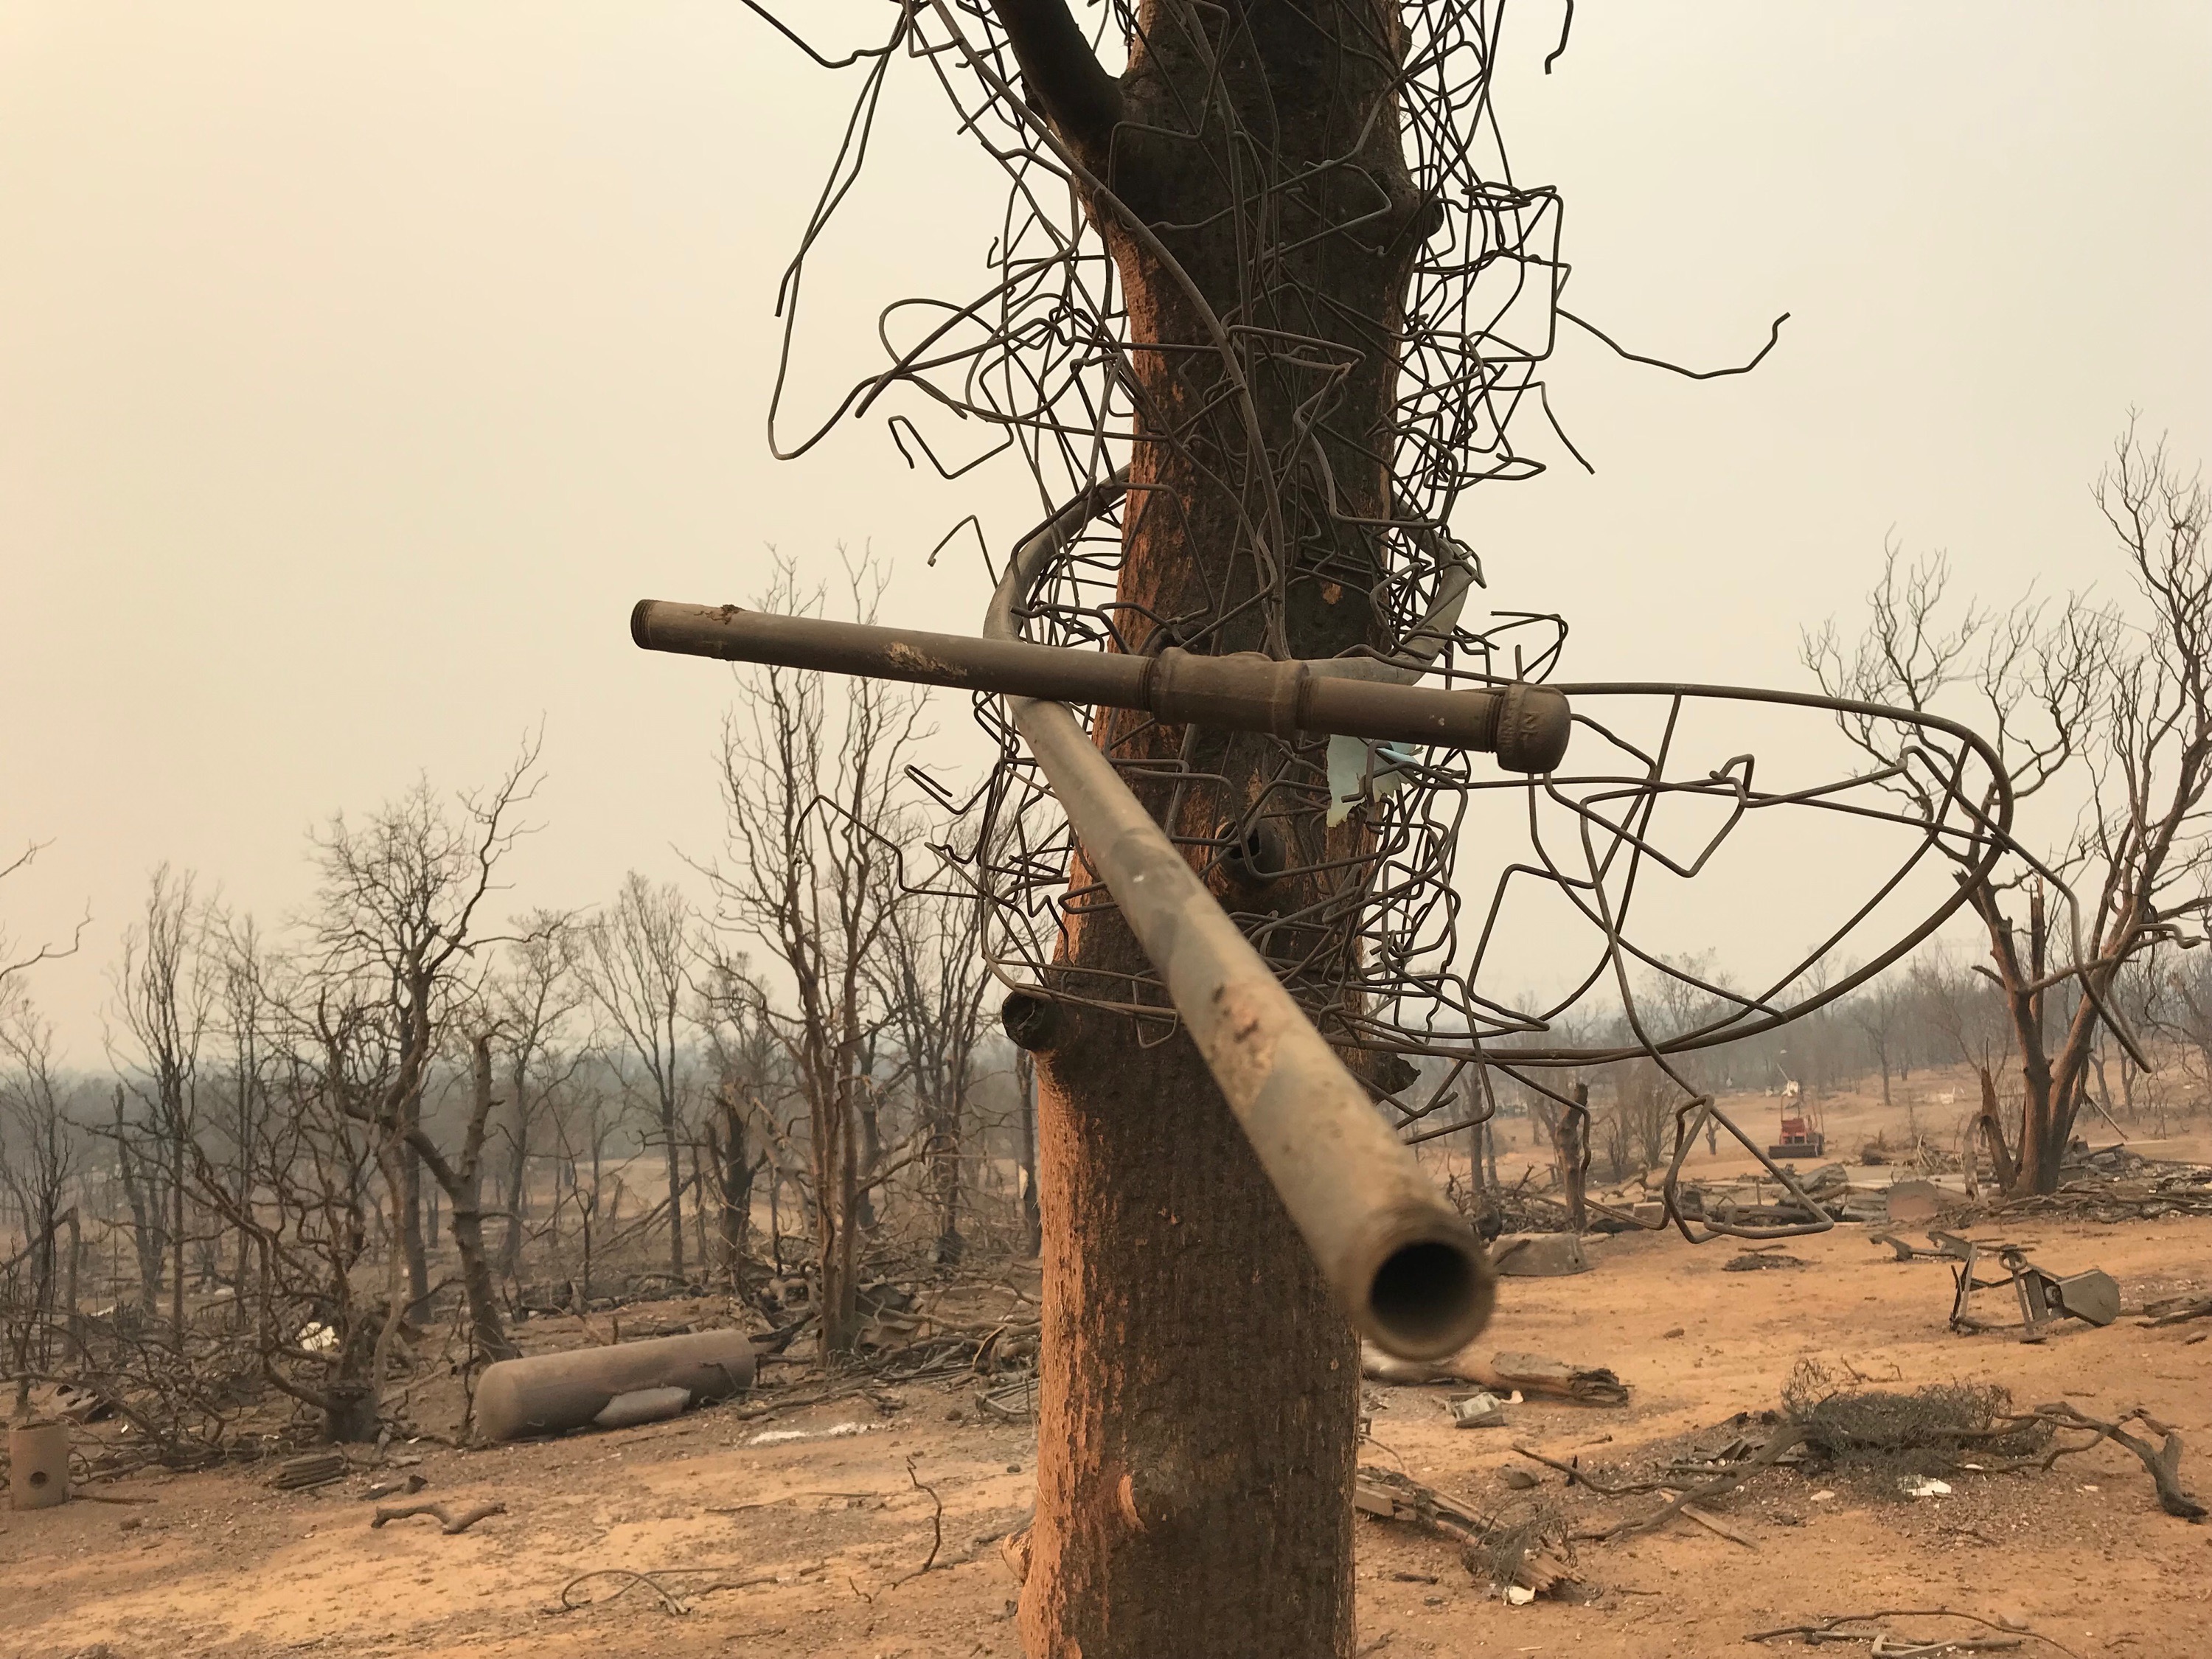 A gas pipe was stuck wrapped around a barren tree after a 